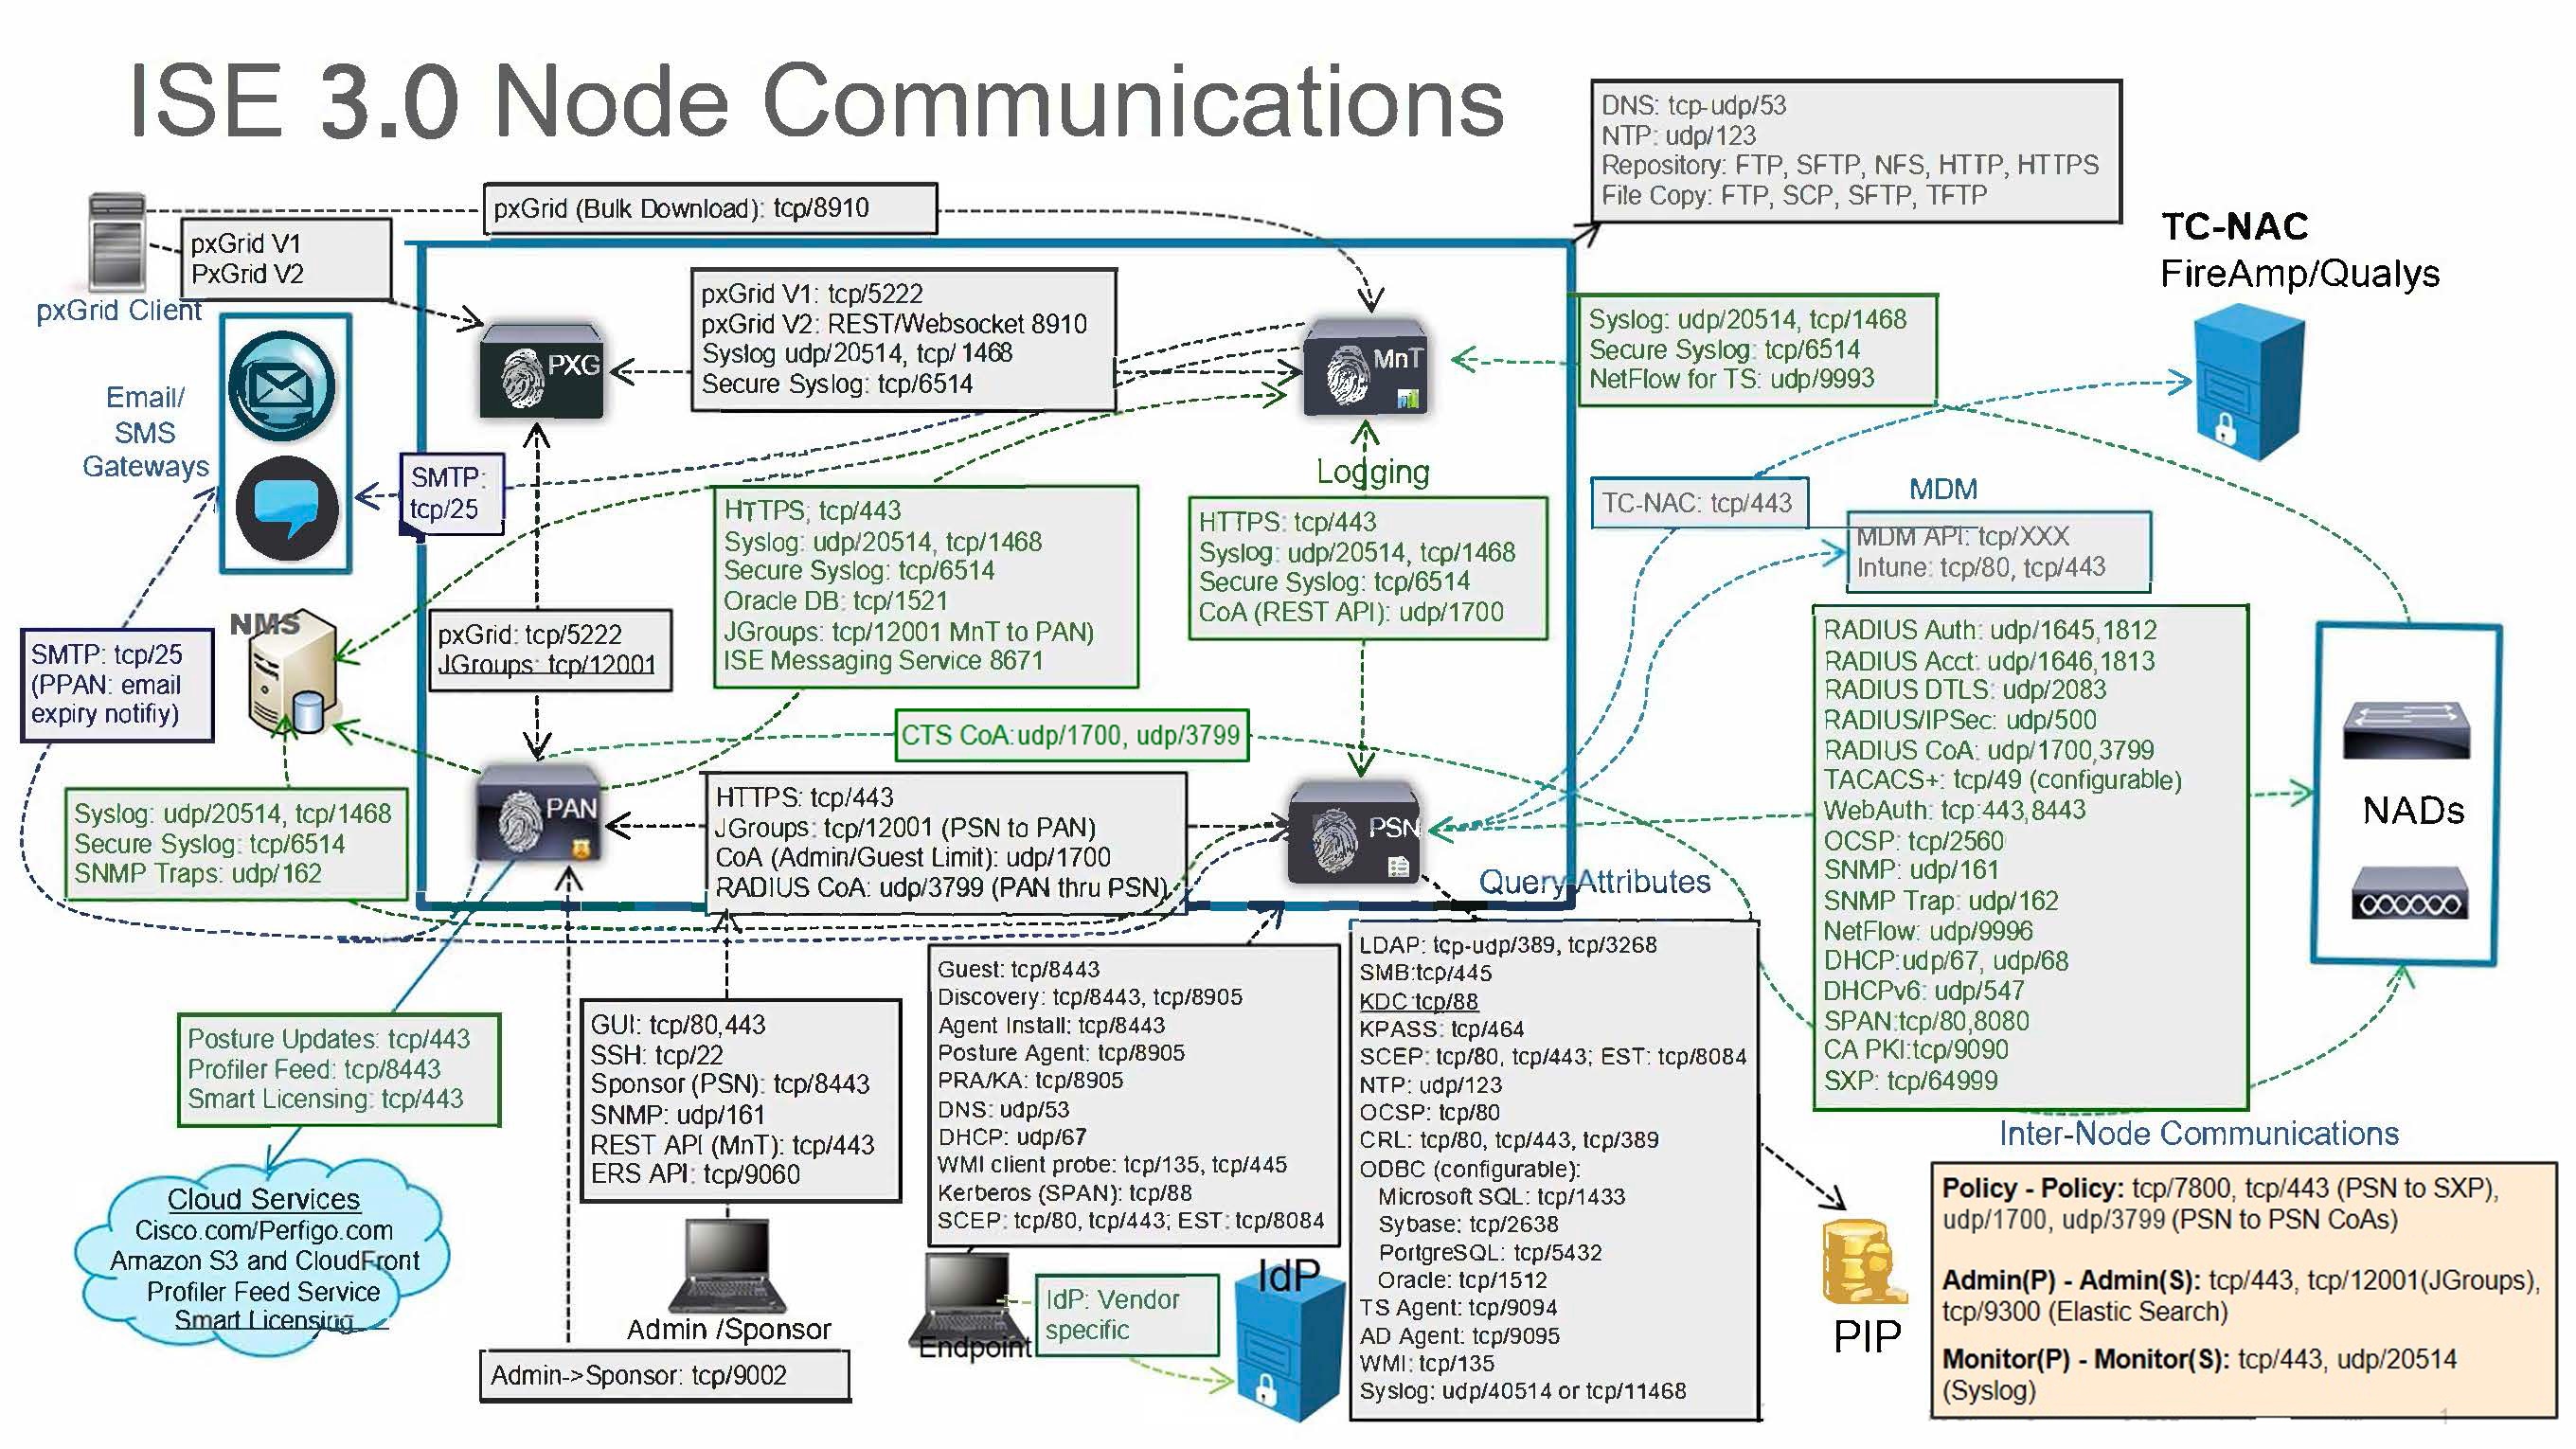 This image shows the ports used in ISE 3.0 node communications.